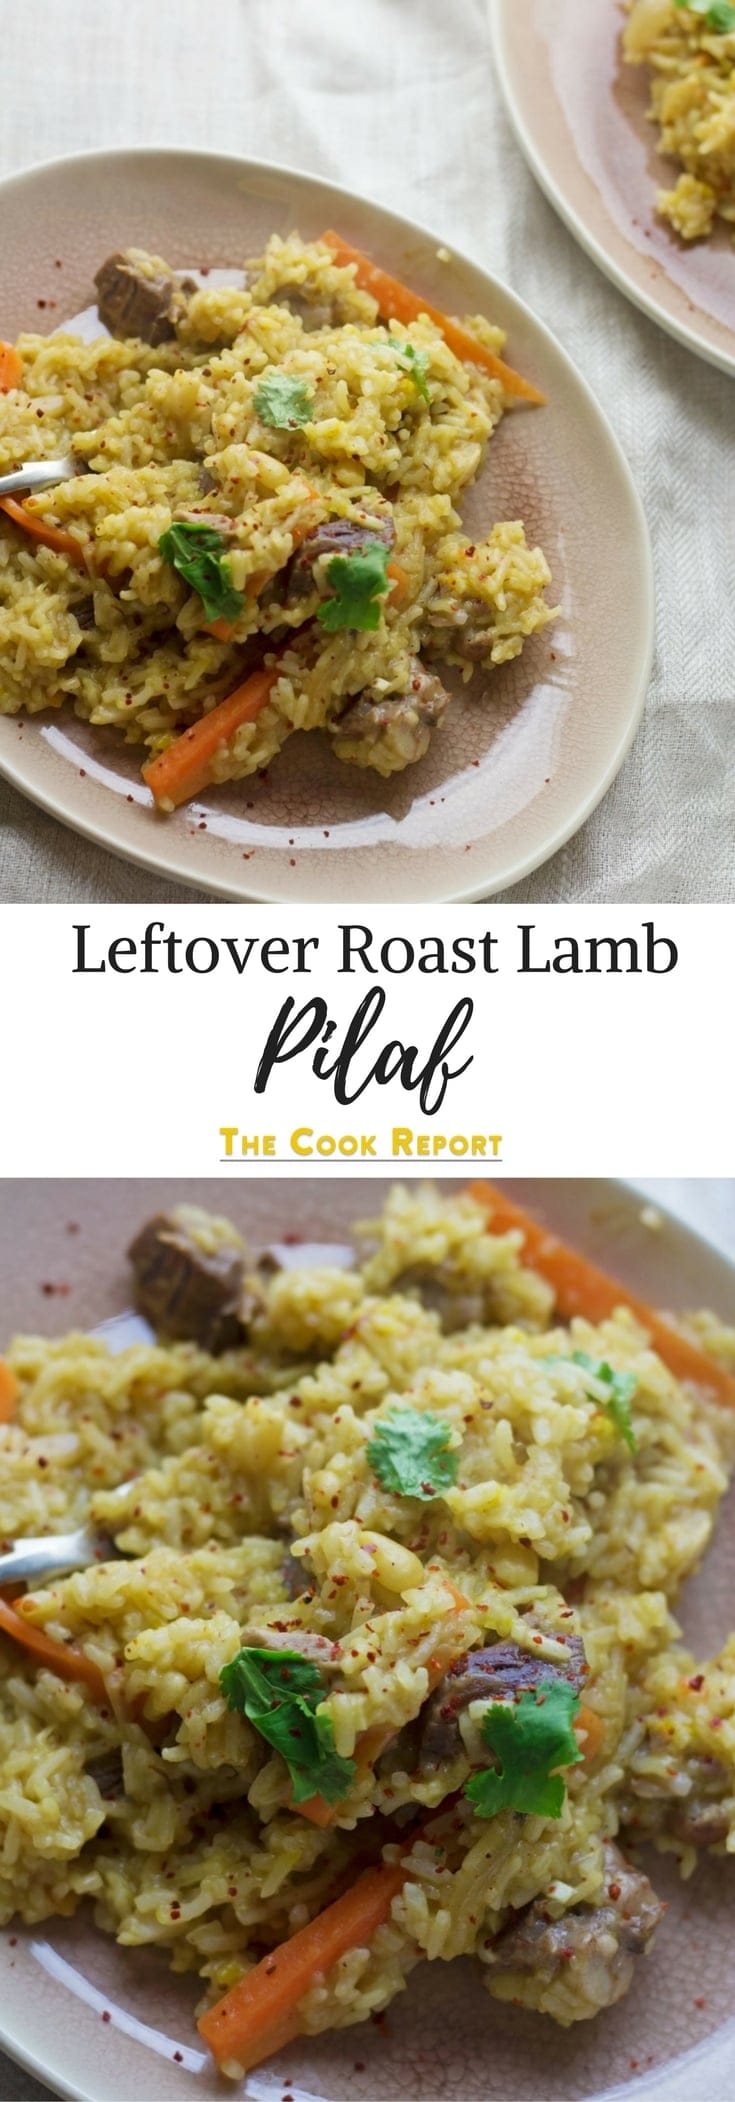 This leftover roast lamb pilaf is a great way to use up leftovers and you could easily substitute the lamb for any other cooked meat!